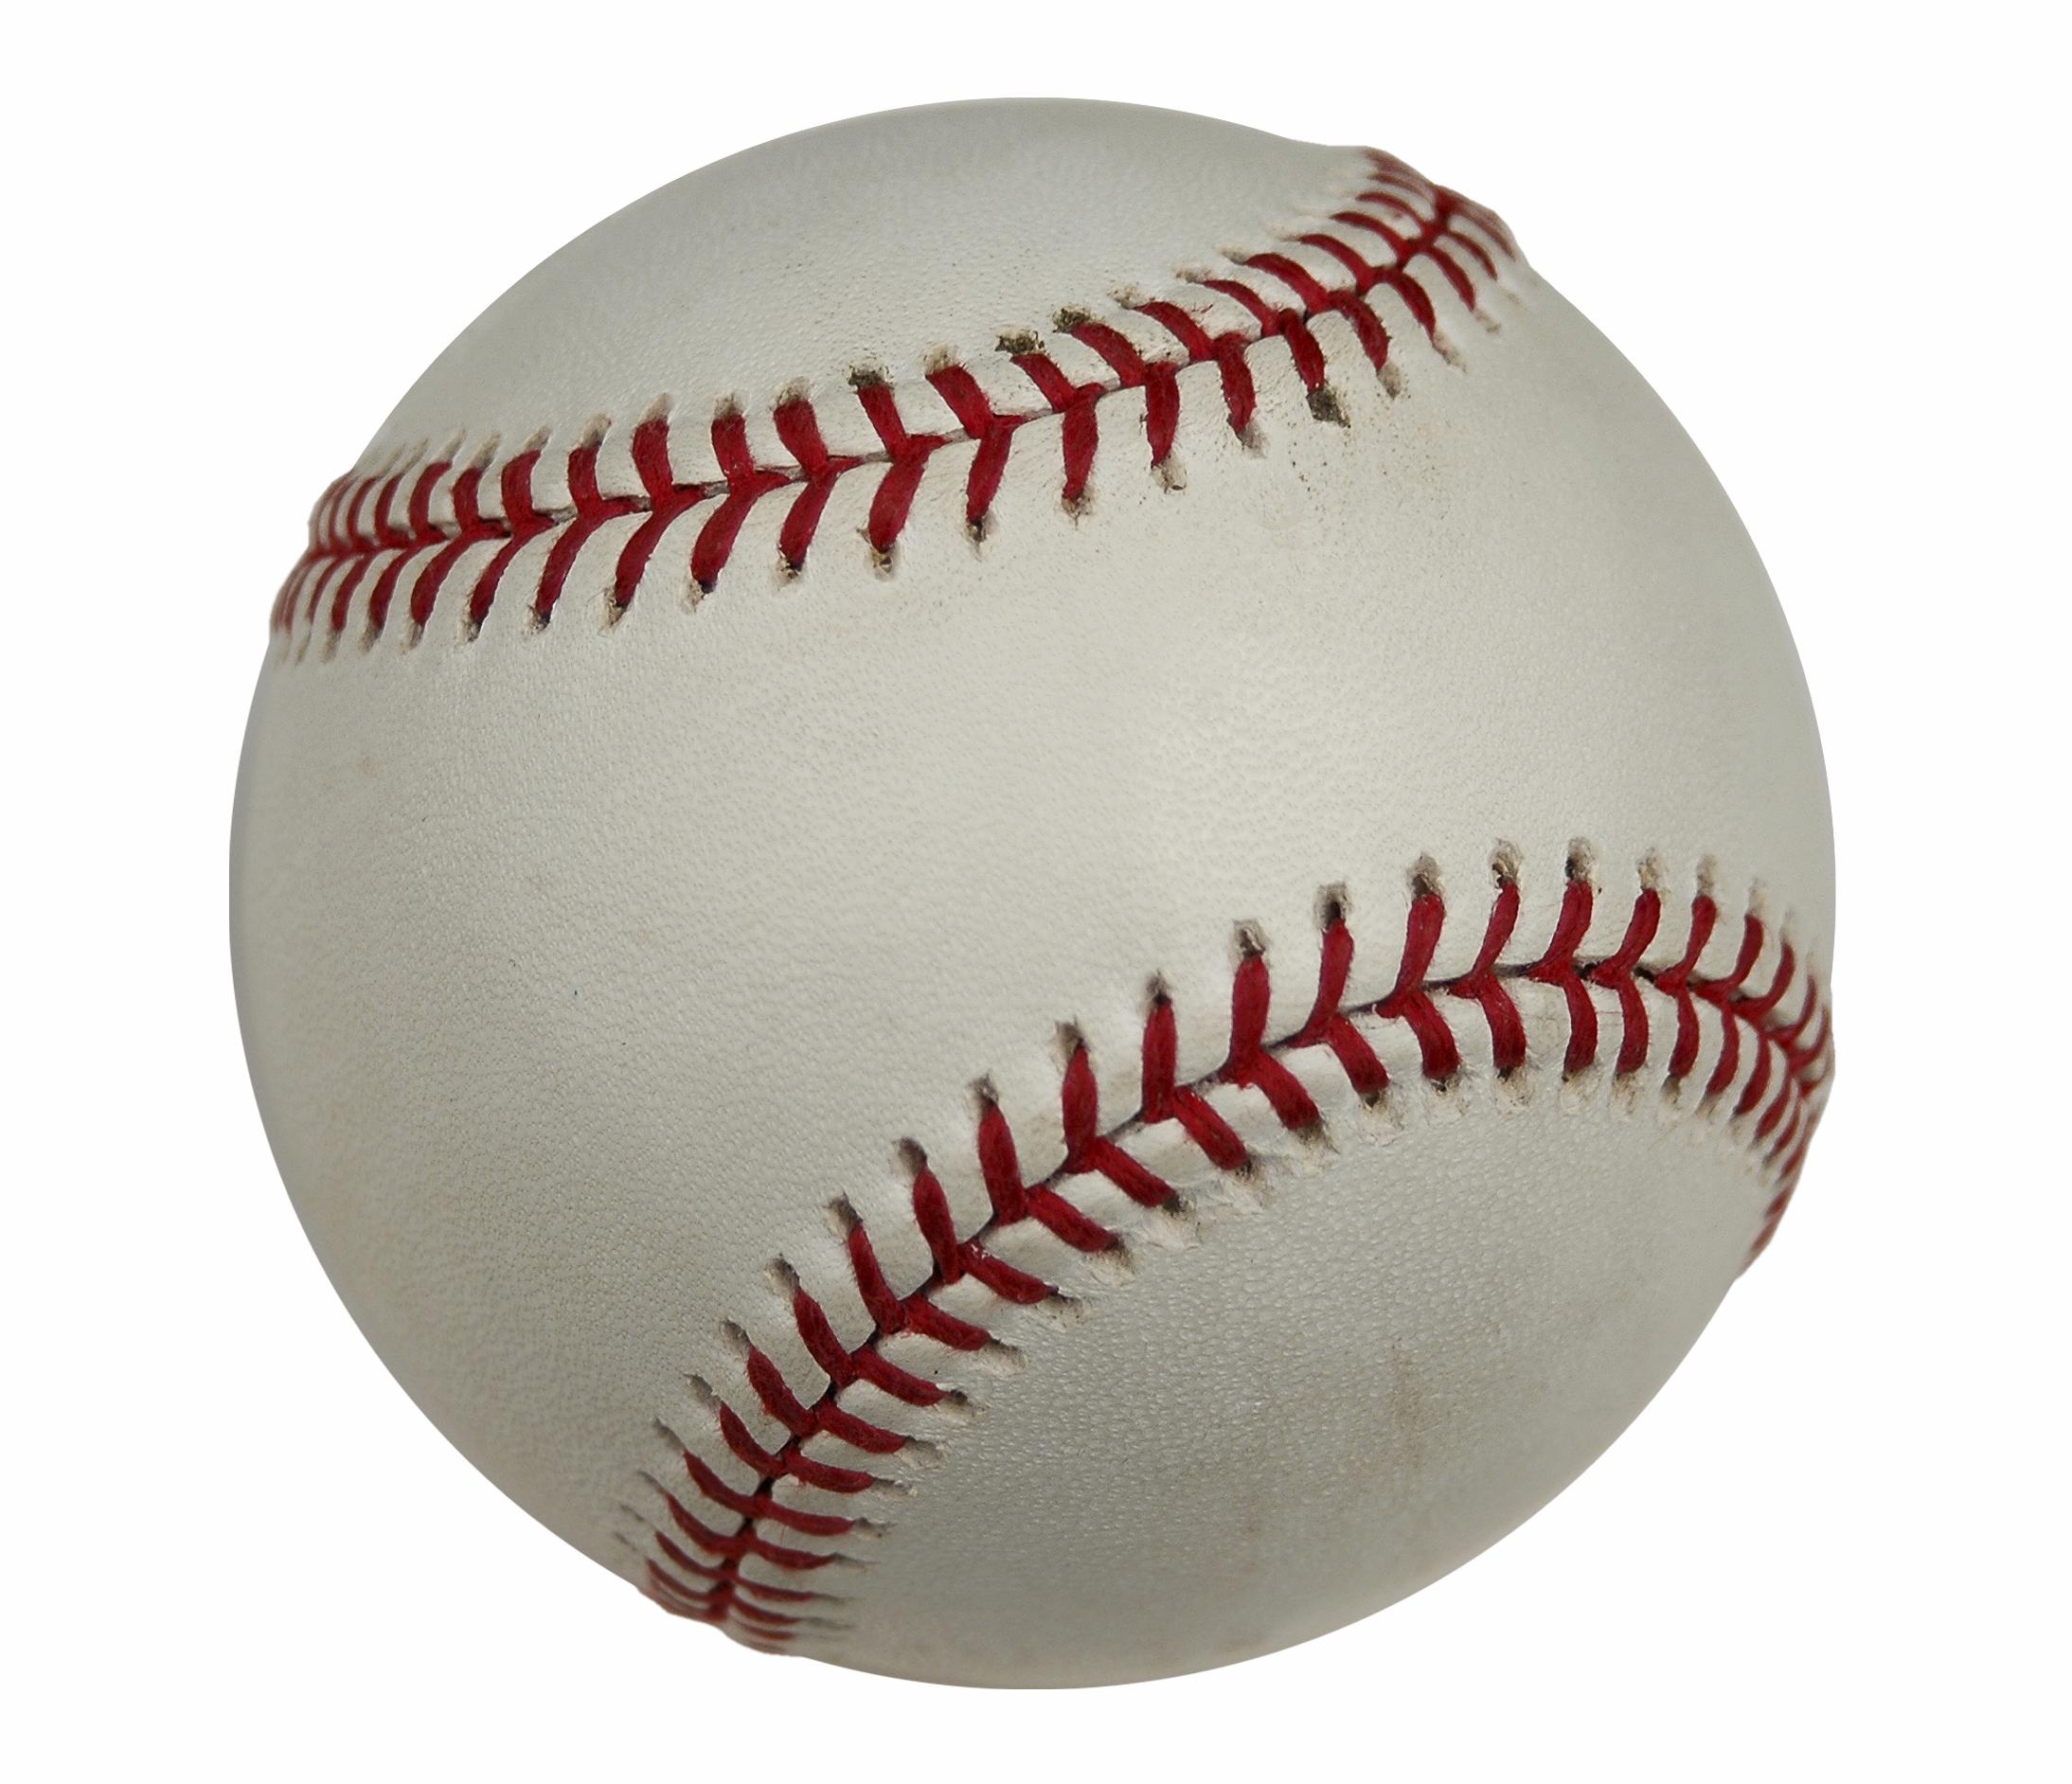 Baseball with clipping path